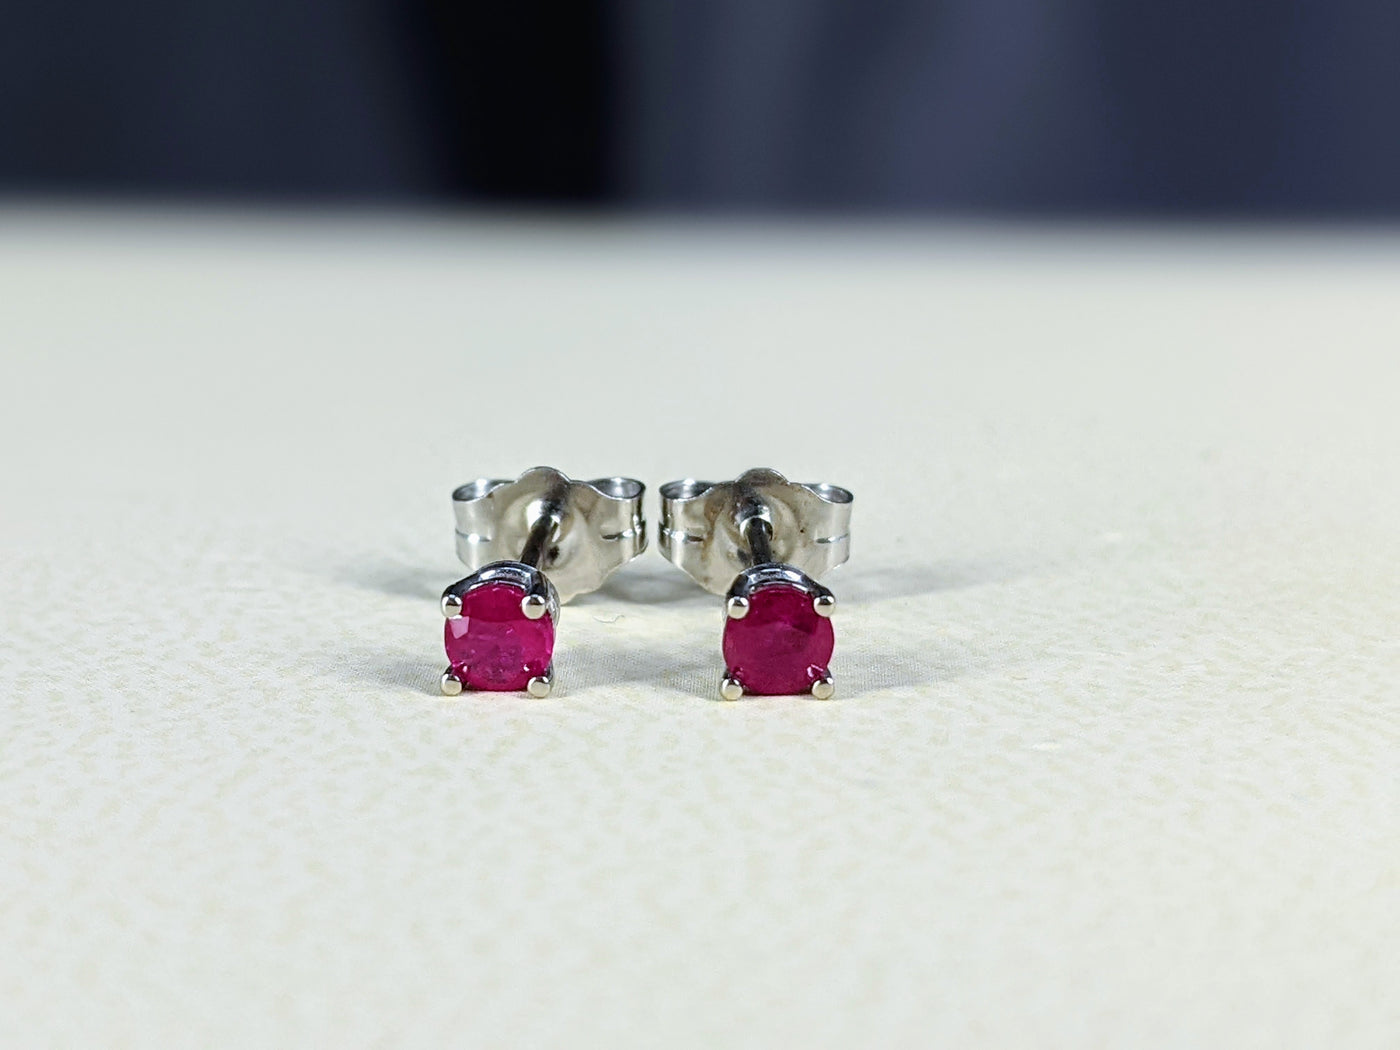 4-Prong Round Cut Ruby Stud Earrings 0.33 ct. tw.